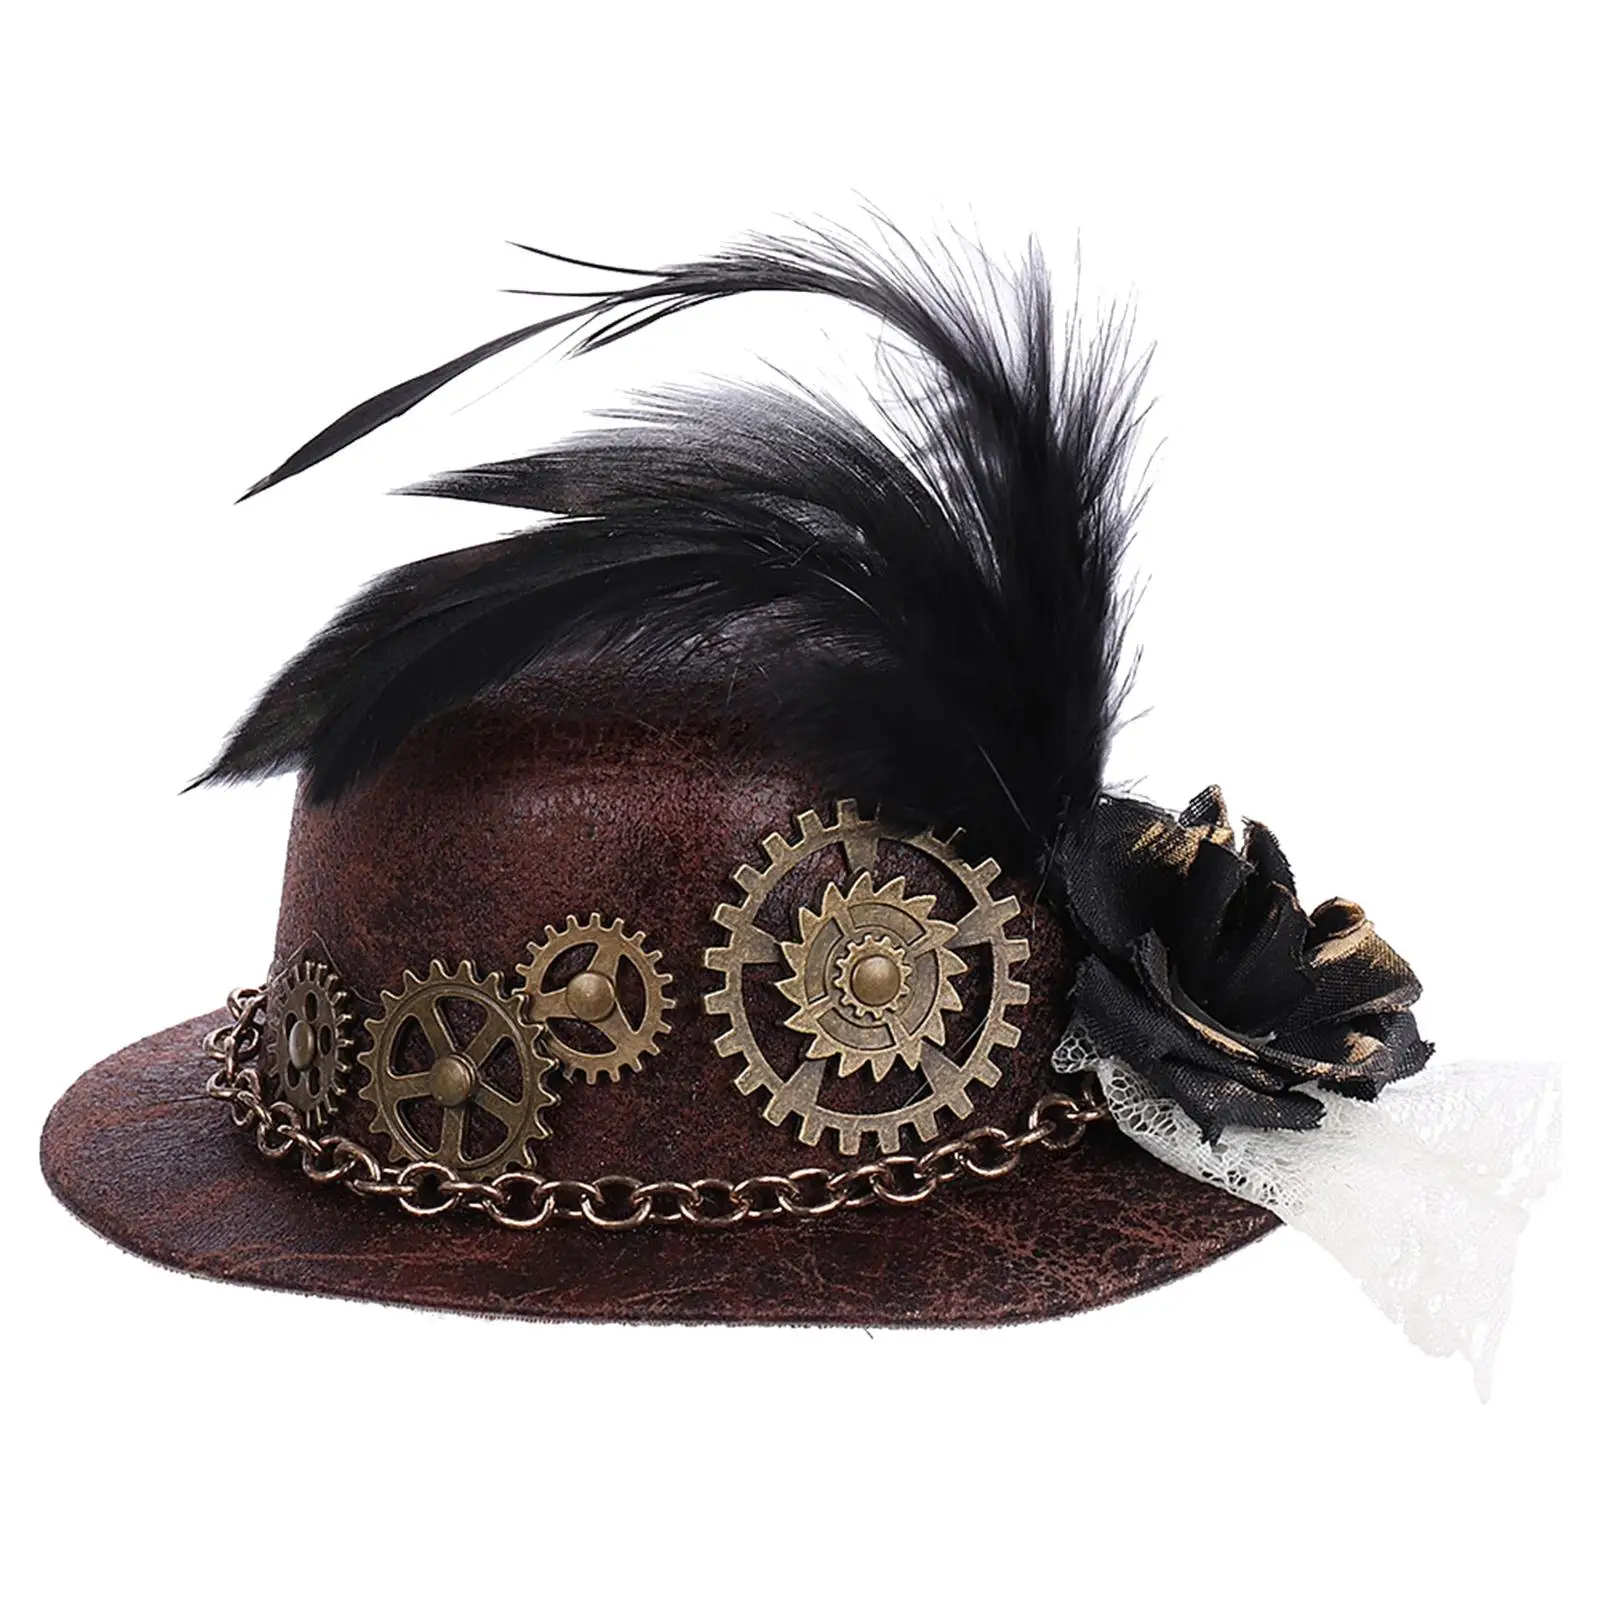 Goth Steampunk Mini Top Hat with Gear Feather Hair Clip, Jazz Hat Cosplay Costume Hat Renaissance Costume Halloween Accessory